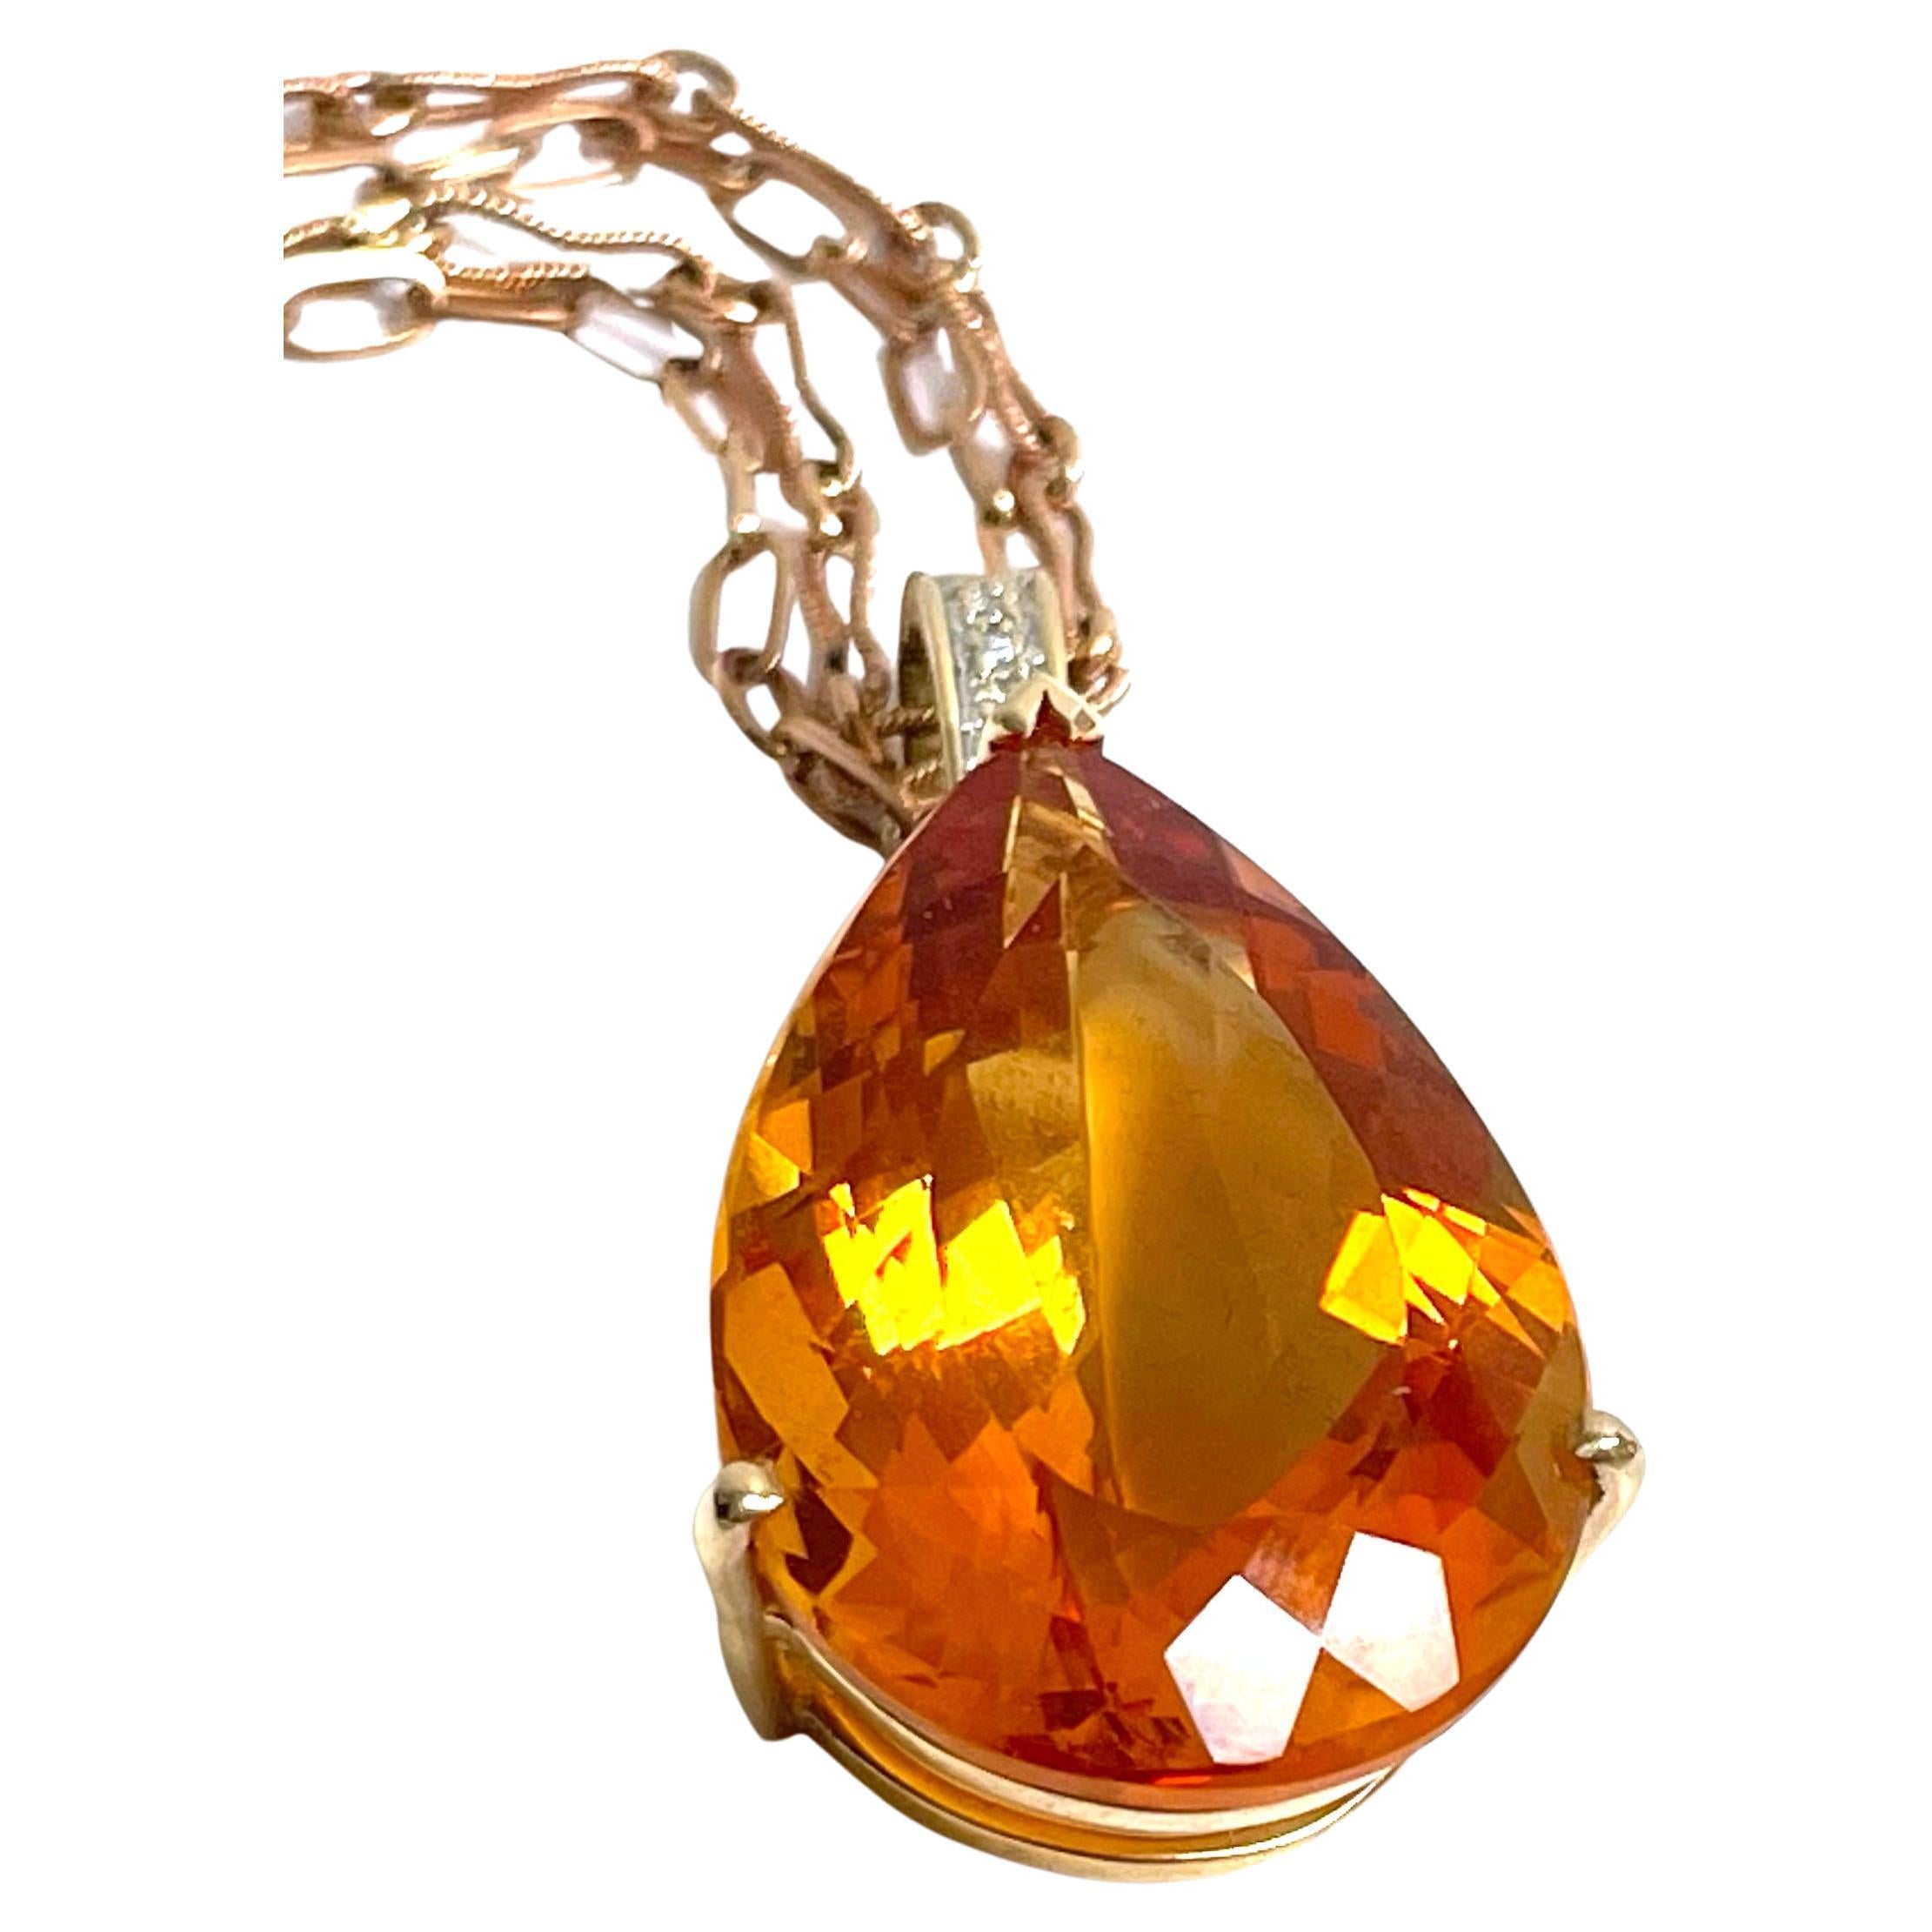 Description
Vividly vibrant, exquisitely elegant, magnificently majestic and simply sublime; if this reflects your style, then this necklace is your ideal adornment. The rare flawless 80 carat faceted pear shape Mandarin Citrine radiates rich fiery